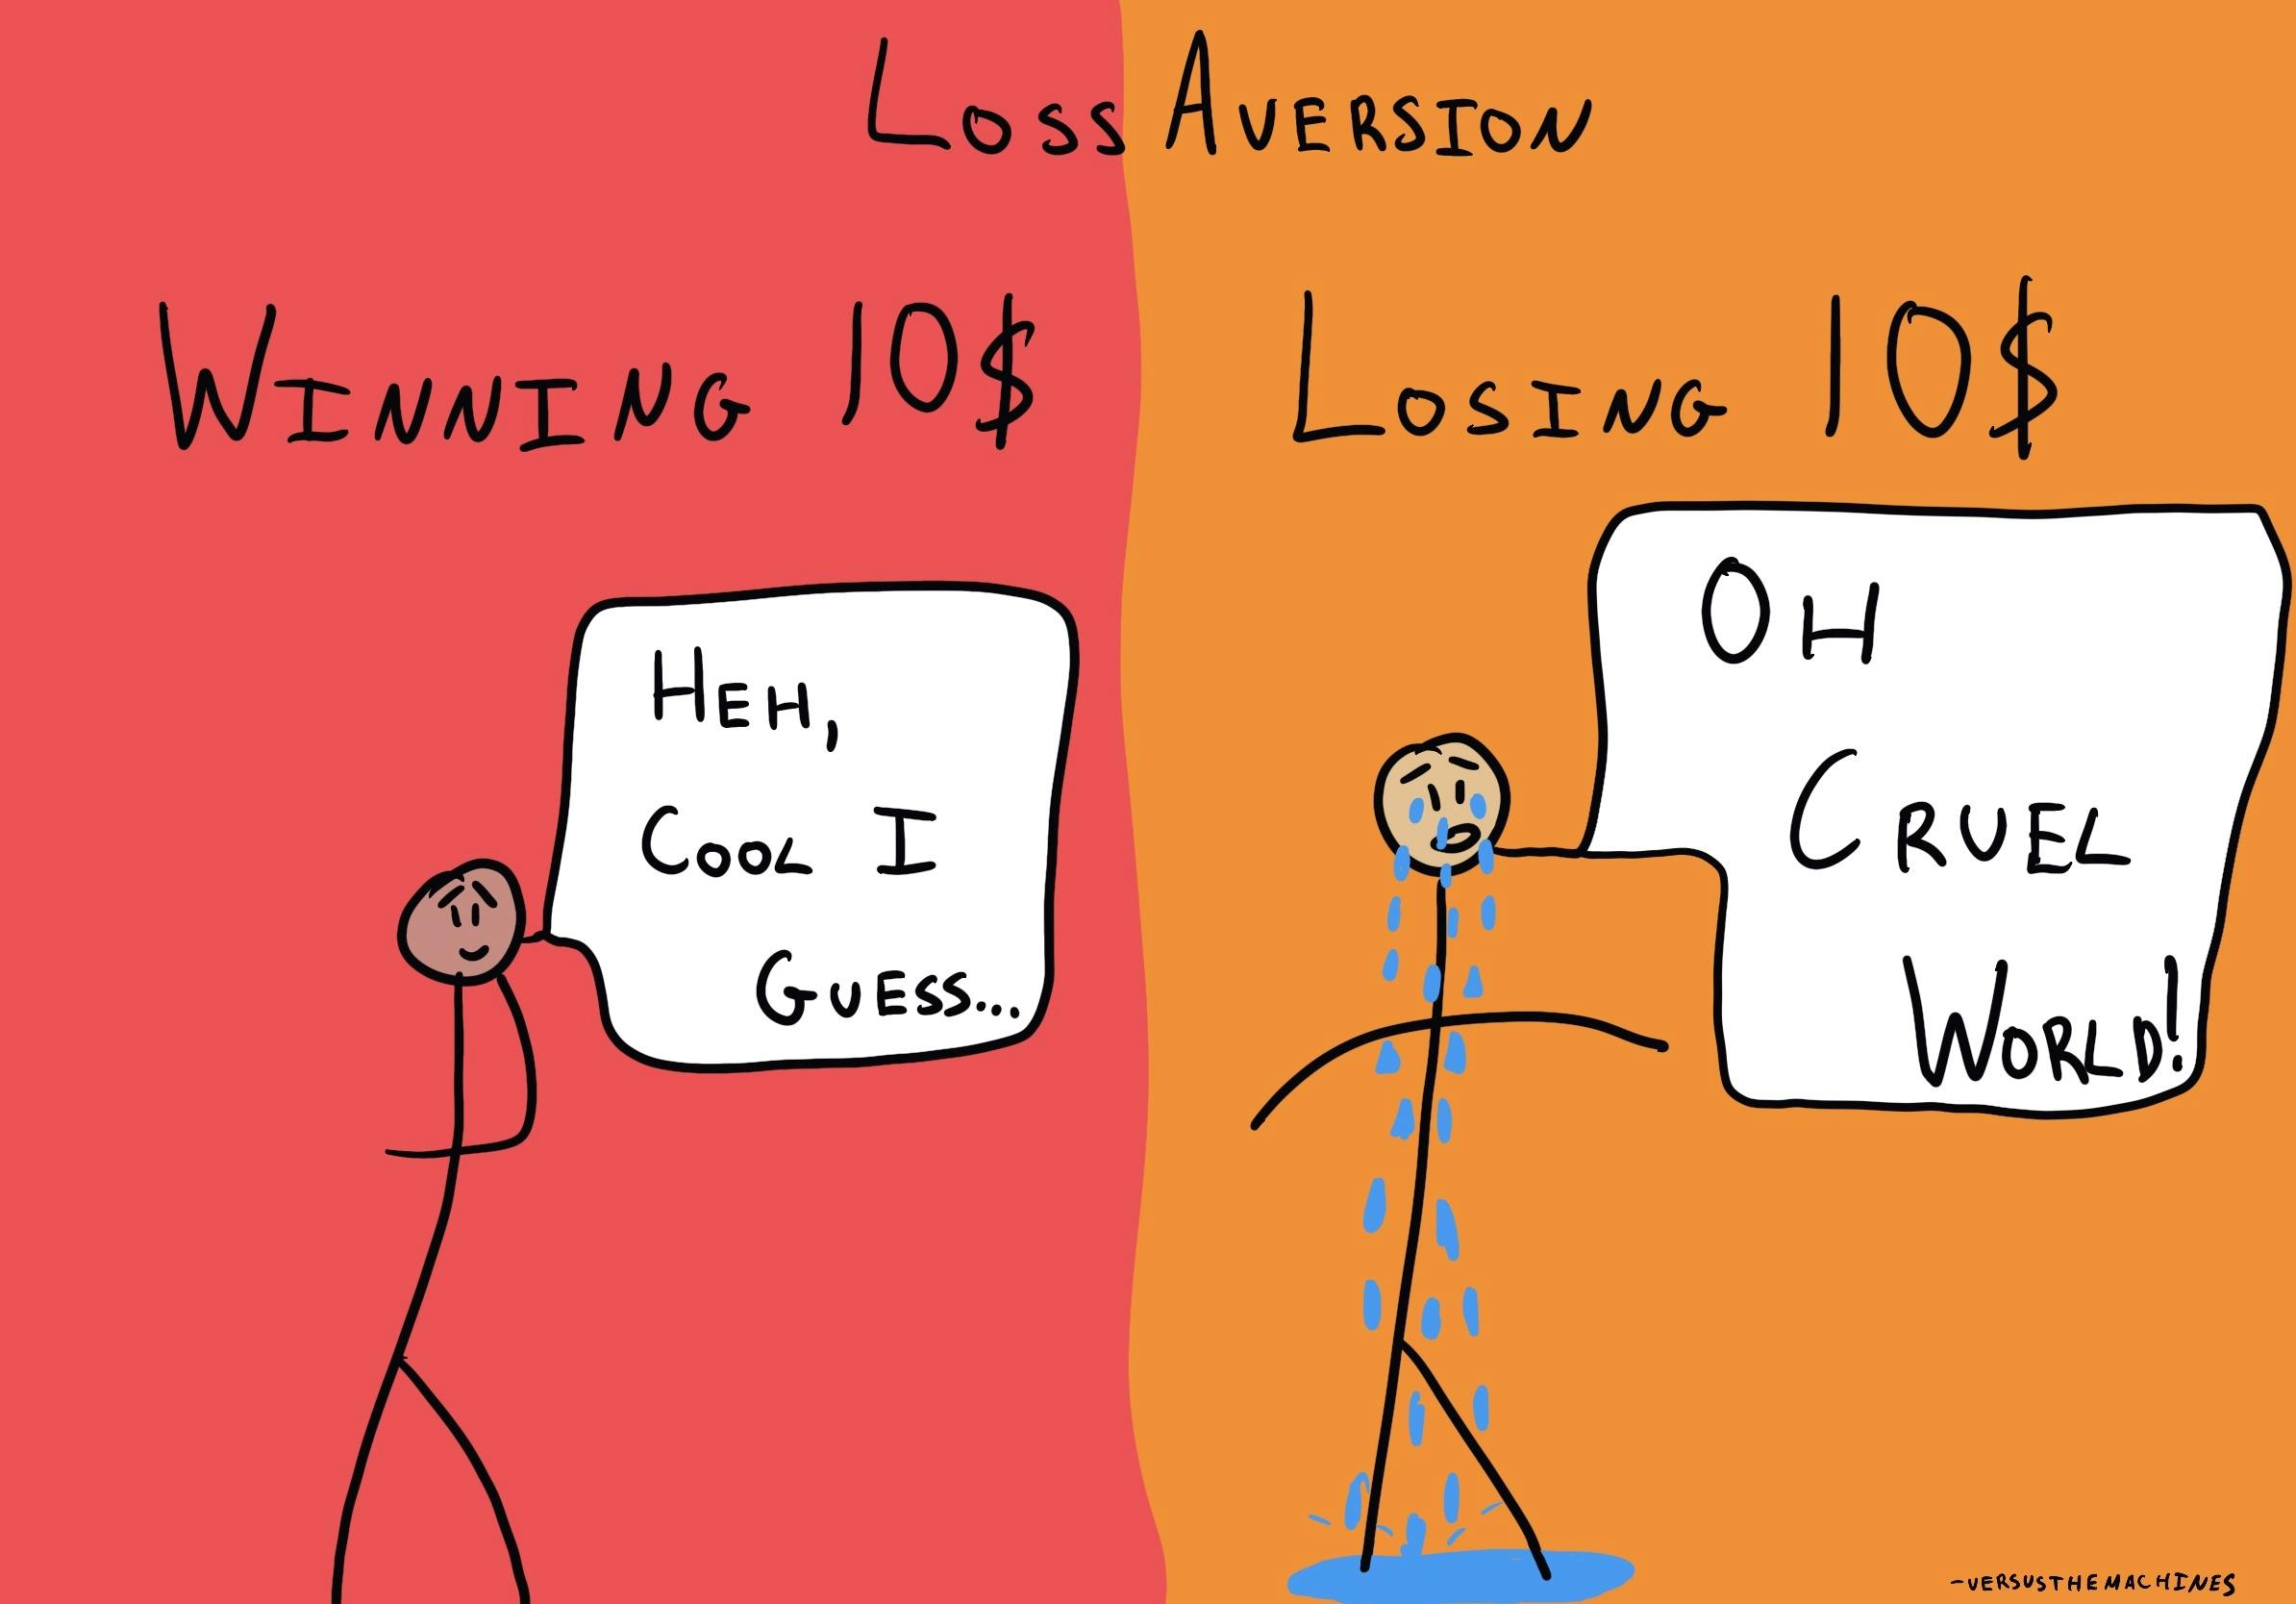 Losing vs. Loosing: Know the Difference and Avoid Common Mistakes